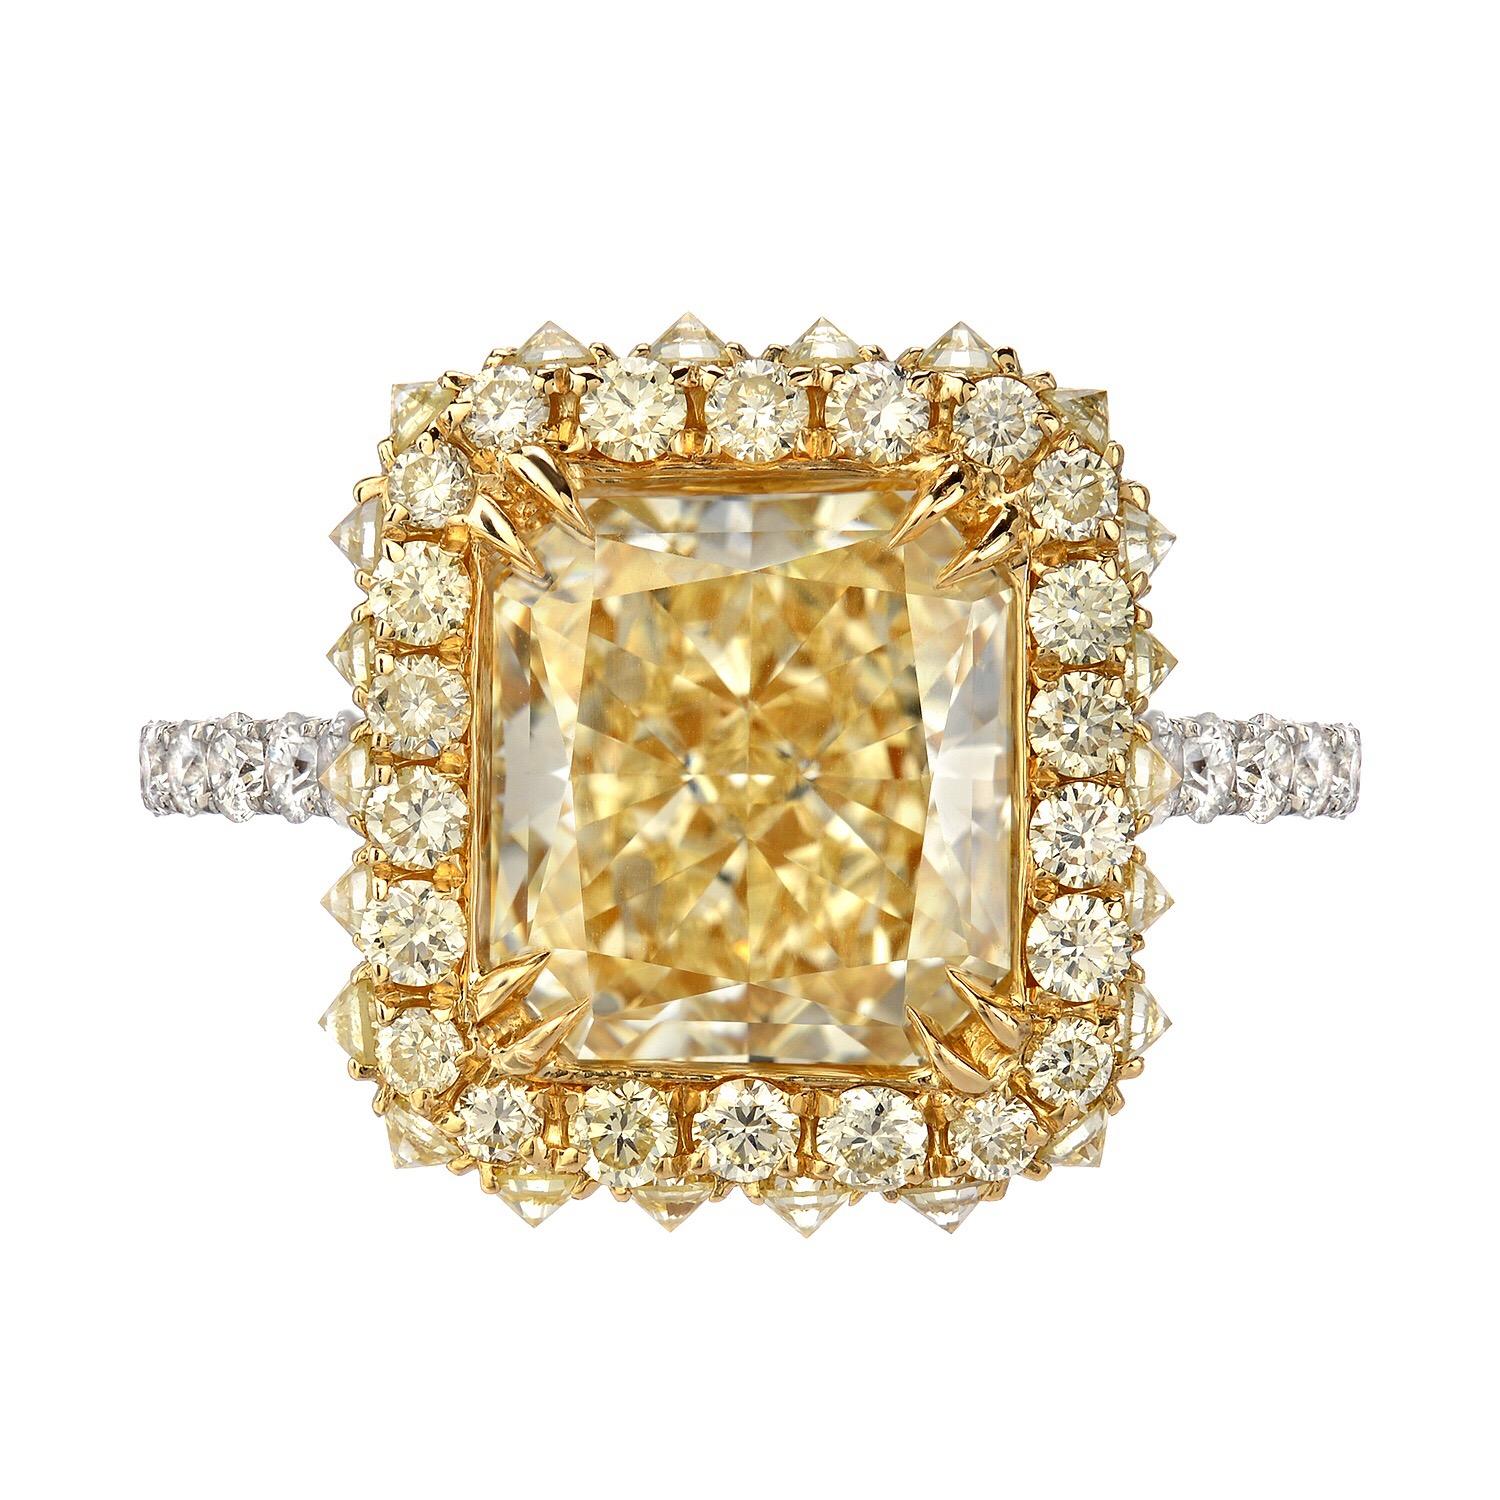 Outstanding 3.78ct Fancy Light Yellow diamond, VS2 clarity, radiant cut, is surrounded by 0.88ct round brilliant Fancy Yellow Diamonds, set inversely on the sides, and 0.66ct G color, VS clarity, round brilliant diamonds set gradually on the